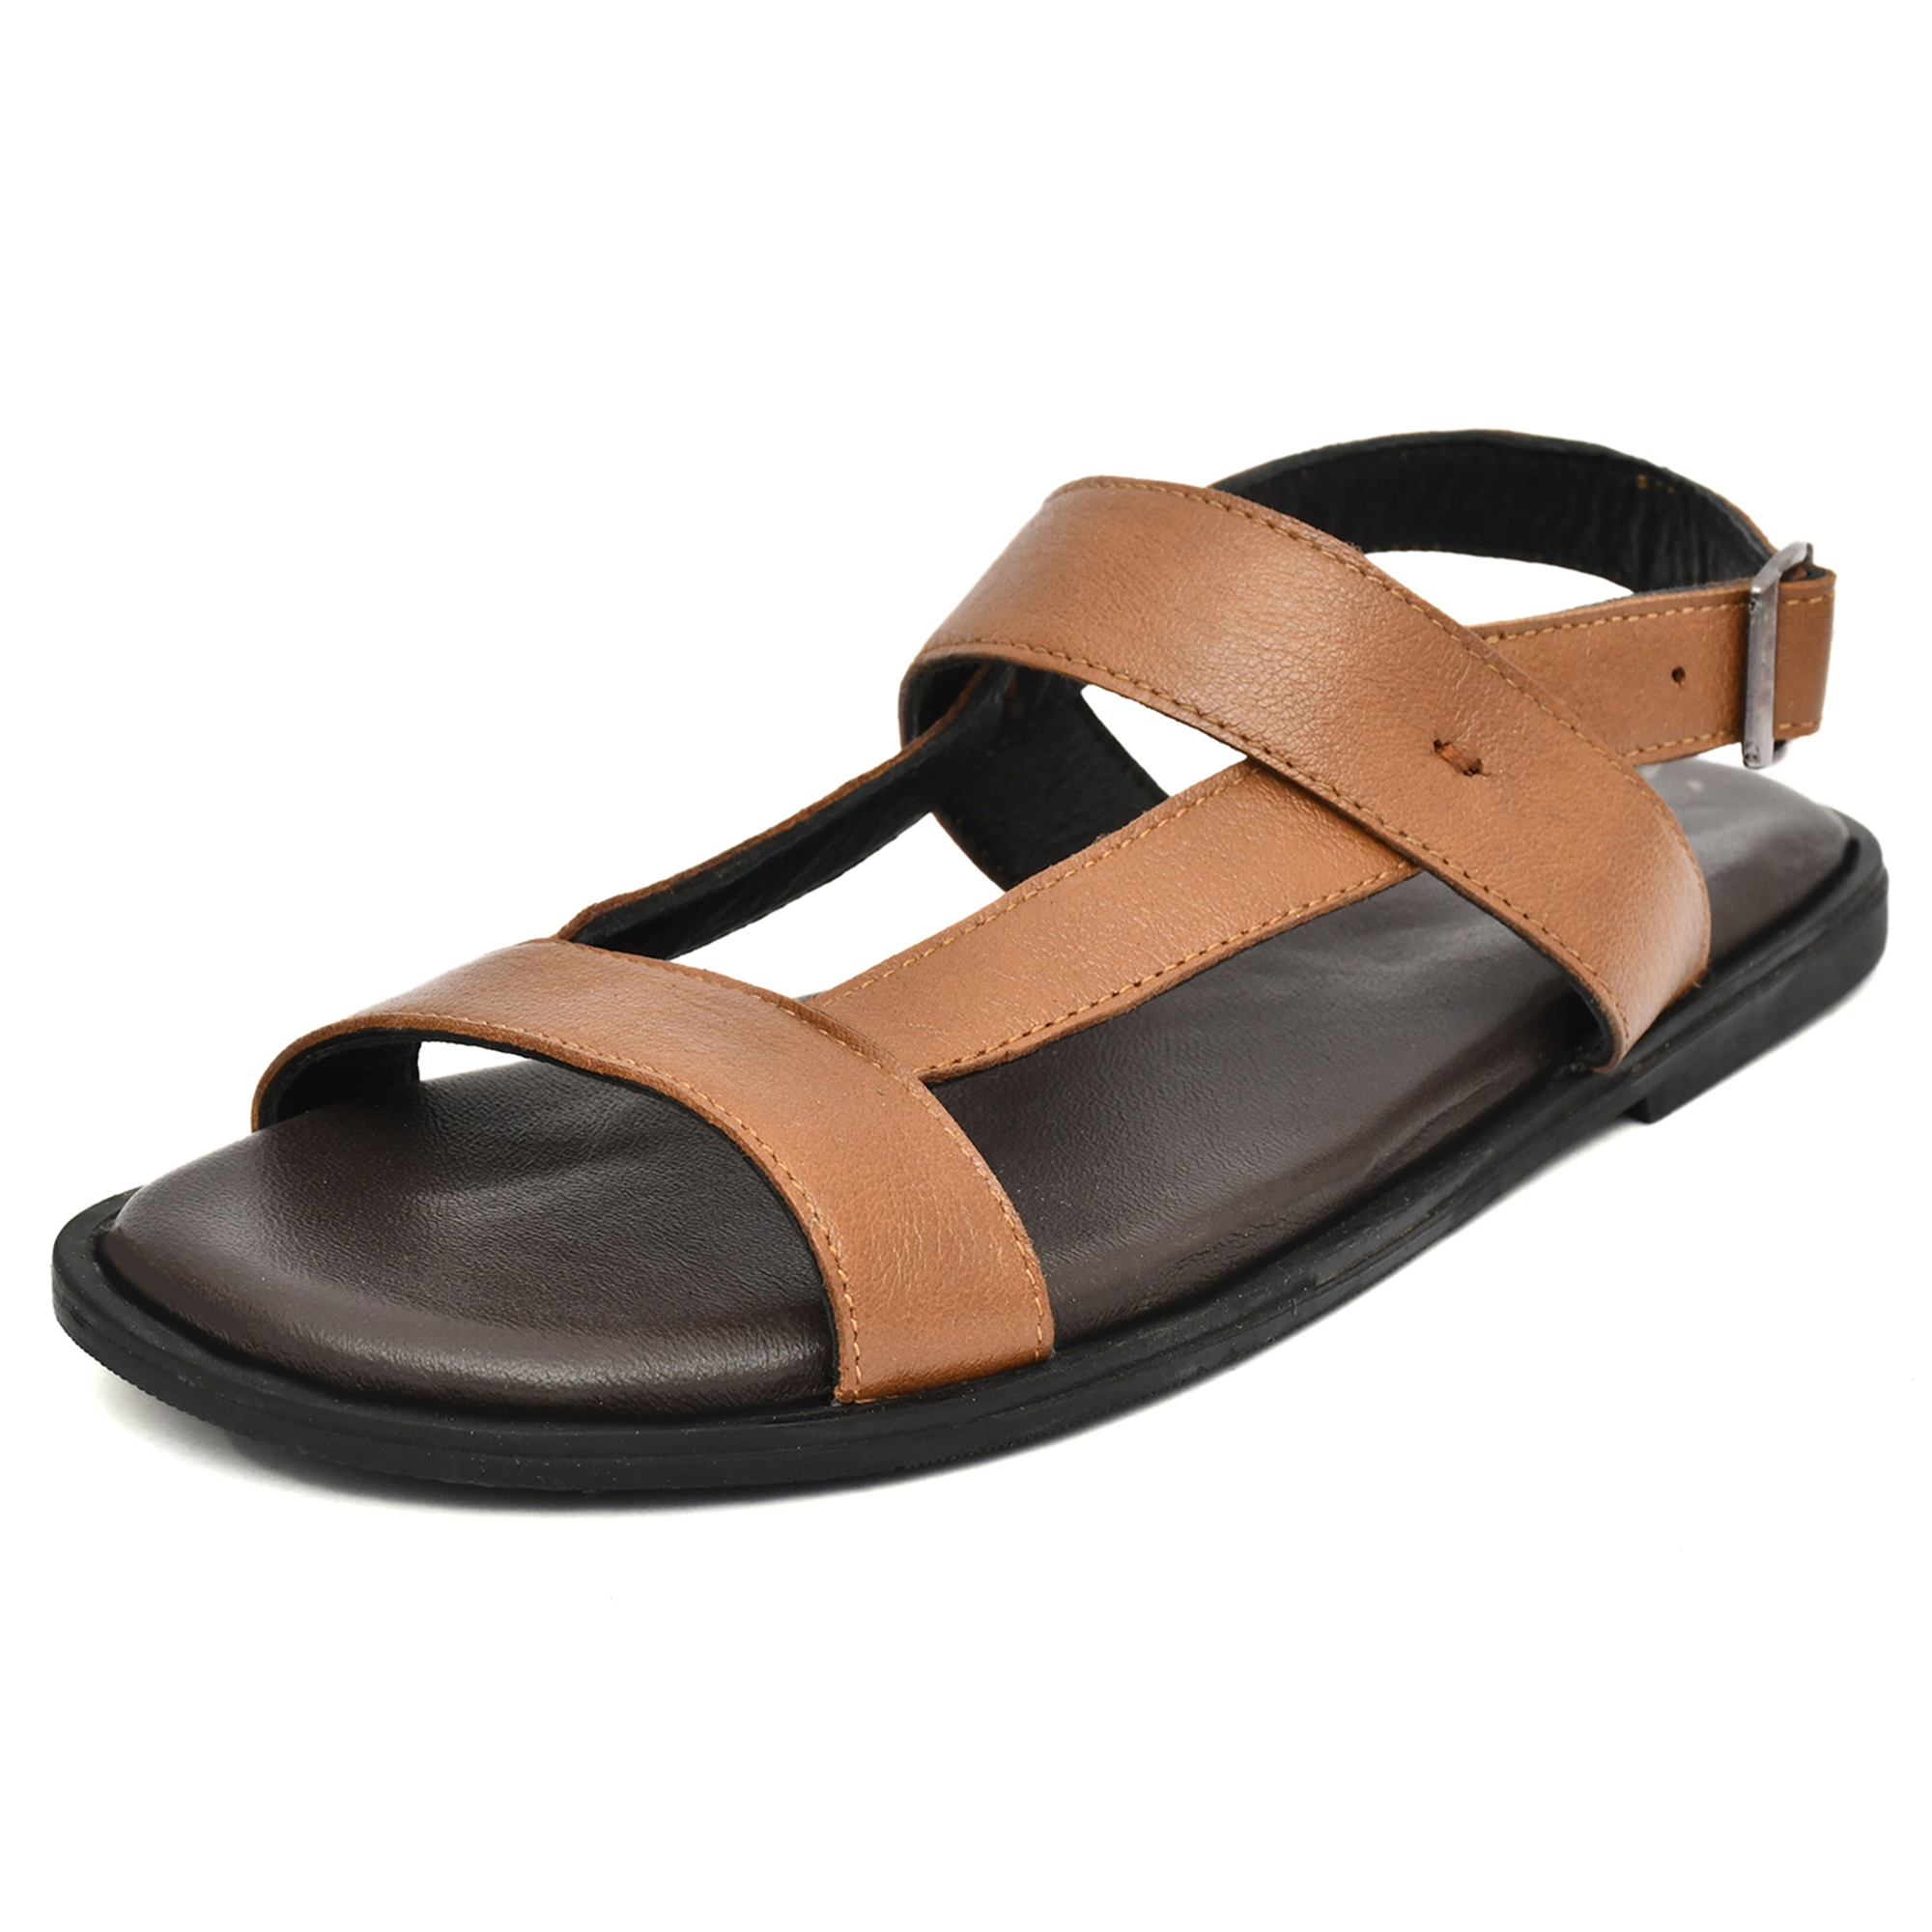 Tan Leather Sandals for Mens with Memory foam footpad by asm. Article : SAN02-GTan Size : UK 5-12